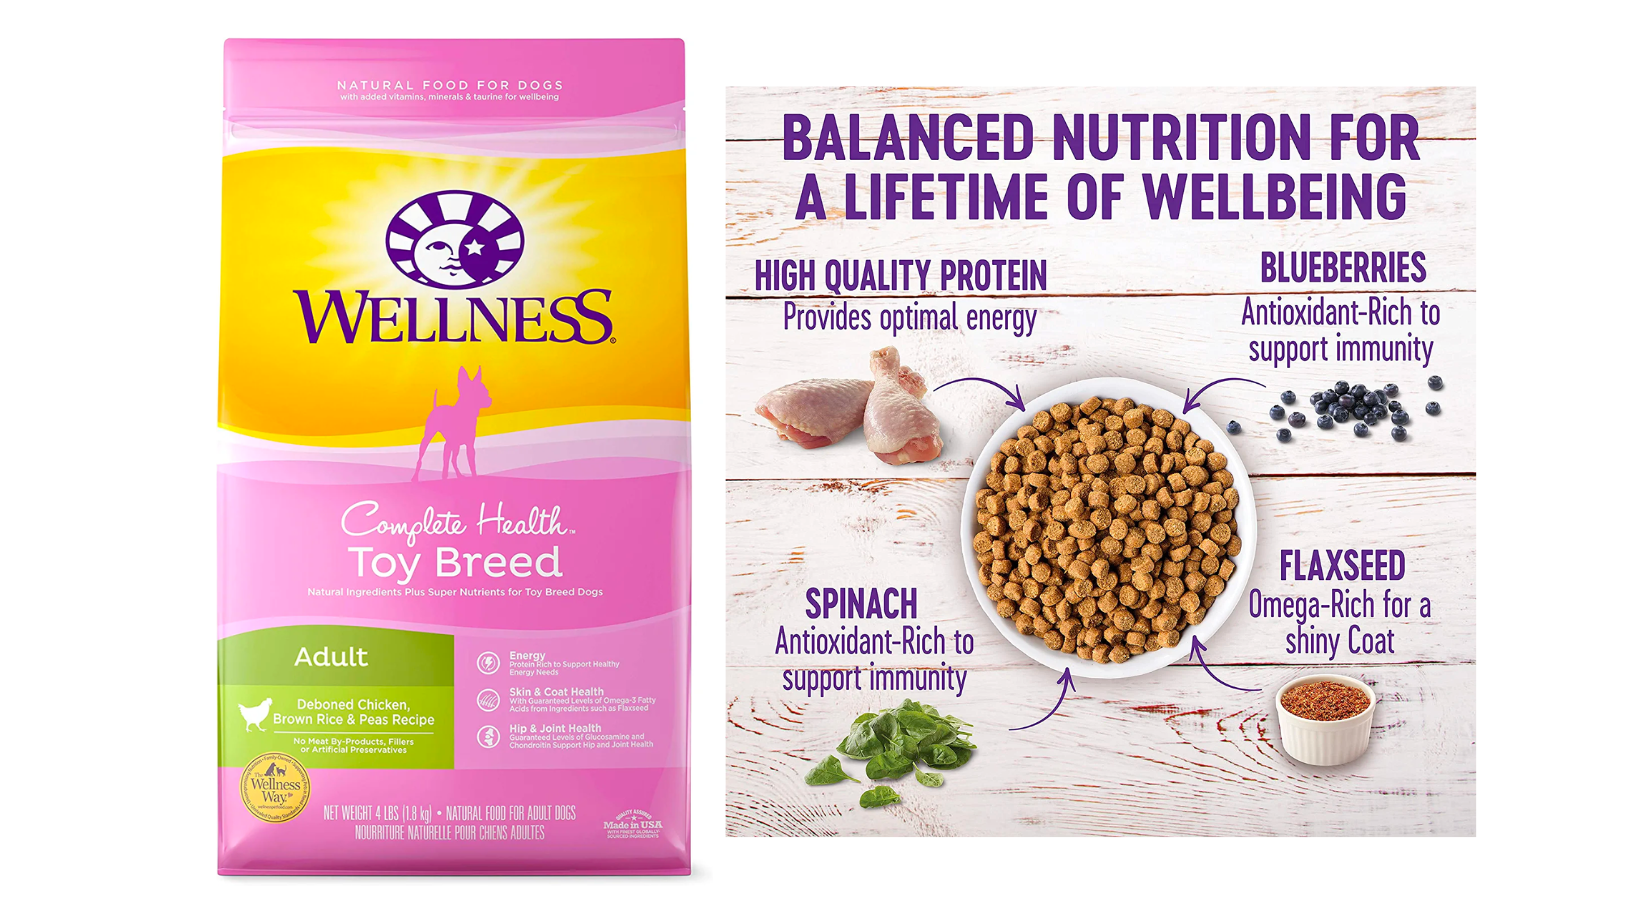 Wellness Complete Health Toy Breed Dry Dog Food with Grains, Chicken & Rice